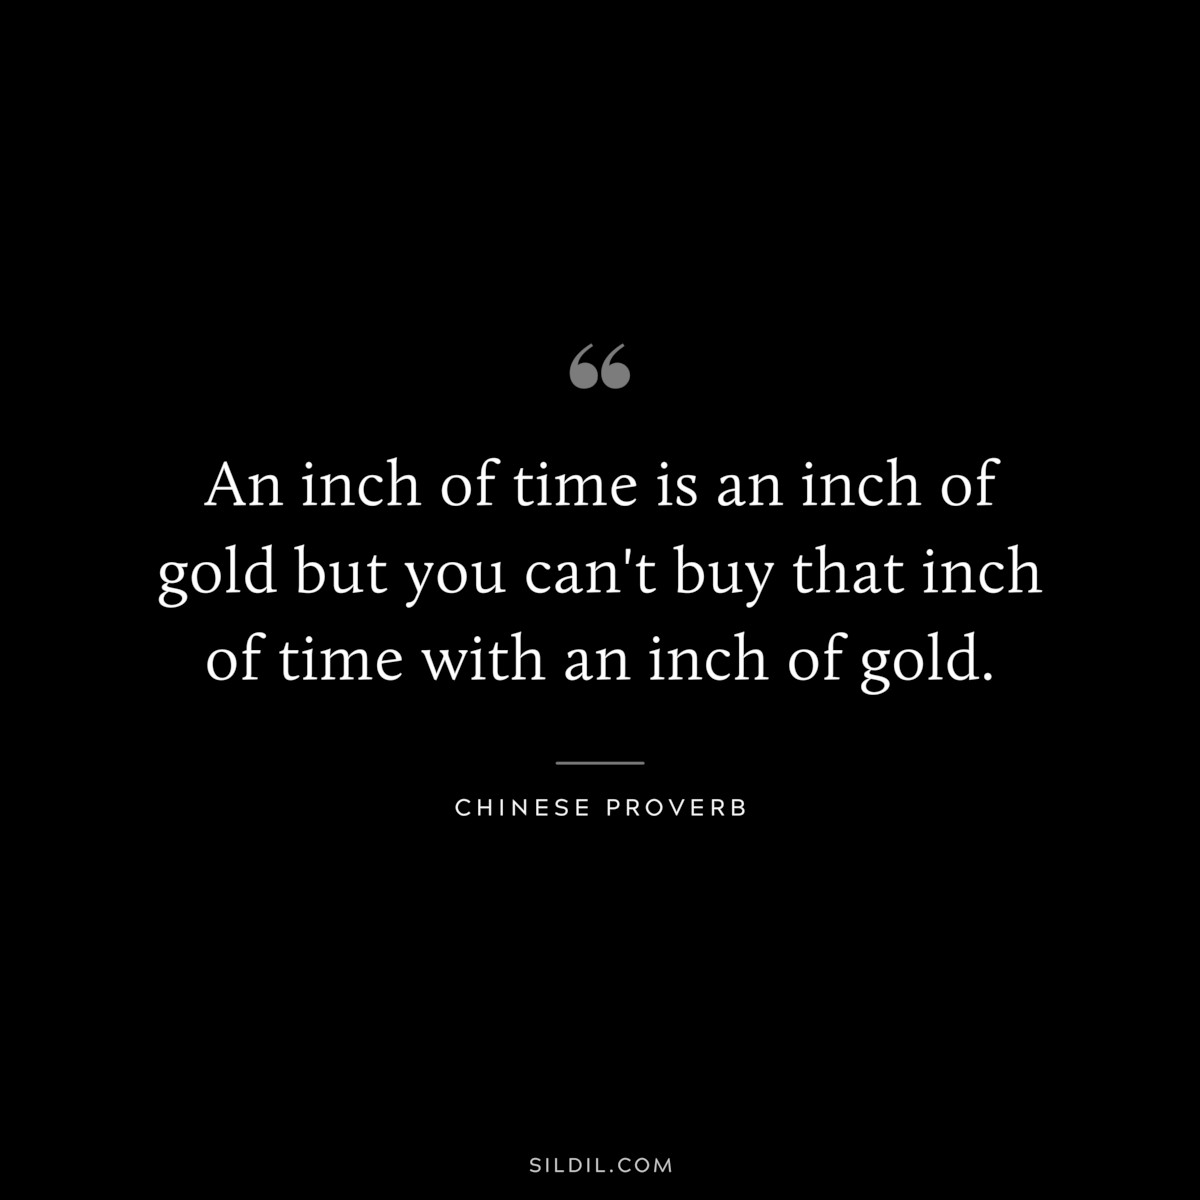 An inch of time is an inch of gold but you can't buy that inch of time with an inch of gold. ― Chinese Proverb